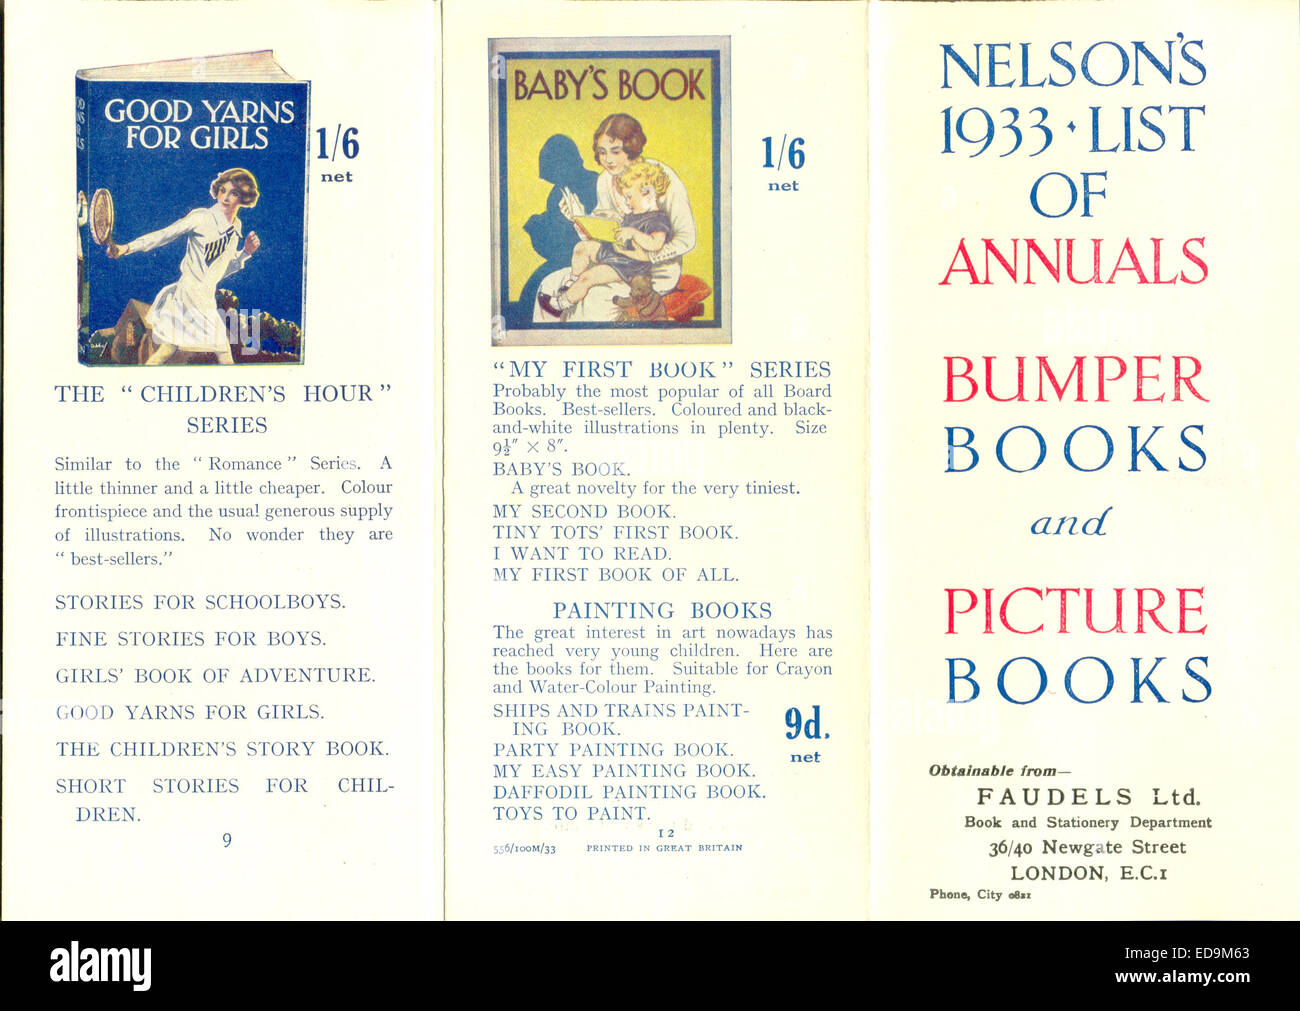 Advertising leaflet for Nelson's 1933 list of Annuals, Bumper Books and Picture Books Stock Photo